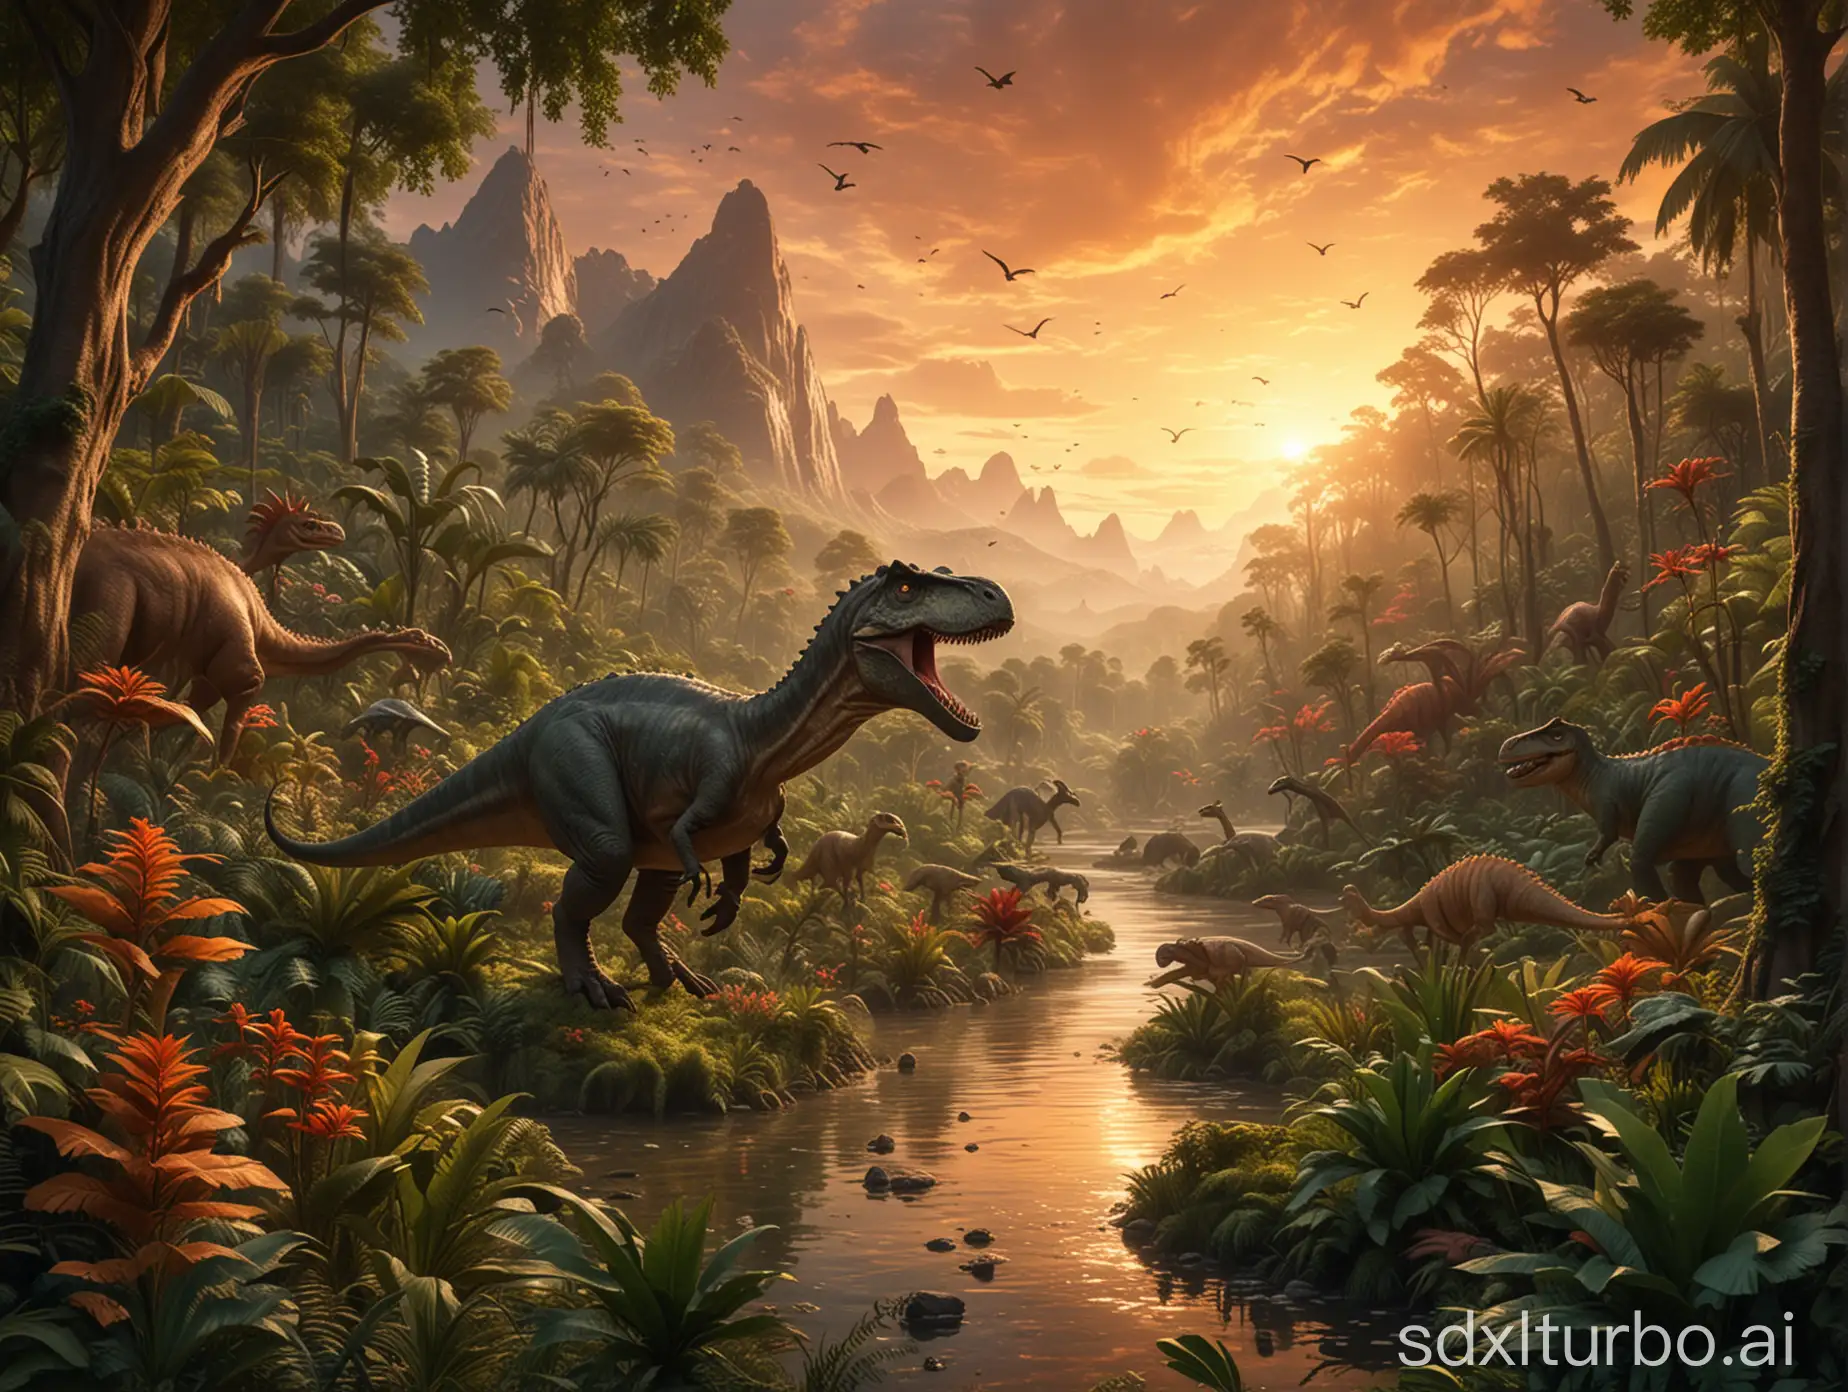 A captivating, cinematic scene of a lush, vibrant forest where dinosaurs, humans, and animals coexist peacefully, with no humans in sight. The dinosaurs display intricate details that showcase their natural splendor, and the background features a breathtaking sunset with a golden sky radiating warmth and serenity. The foreground is filled with lush greenery, a winding river, and a diverse range of flora and fauna. The composition exudes harmony, magic, and awe, providing a visually stunning and immersive experience. This masterpiece skillfully blends illustration, photography, and 3D rendering, featuring a poster-like design and a 16:9 aspect ratio, resulting in a visually engaging and dynamic display.